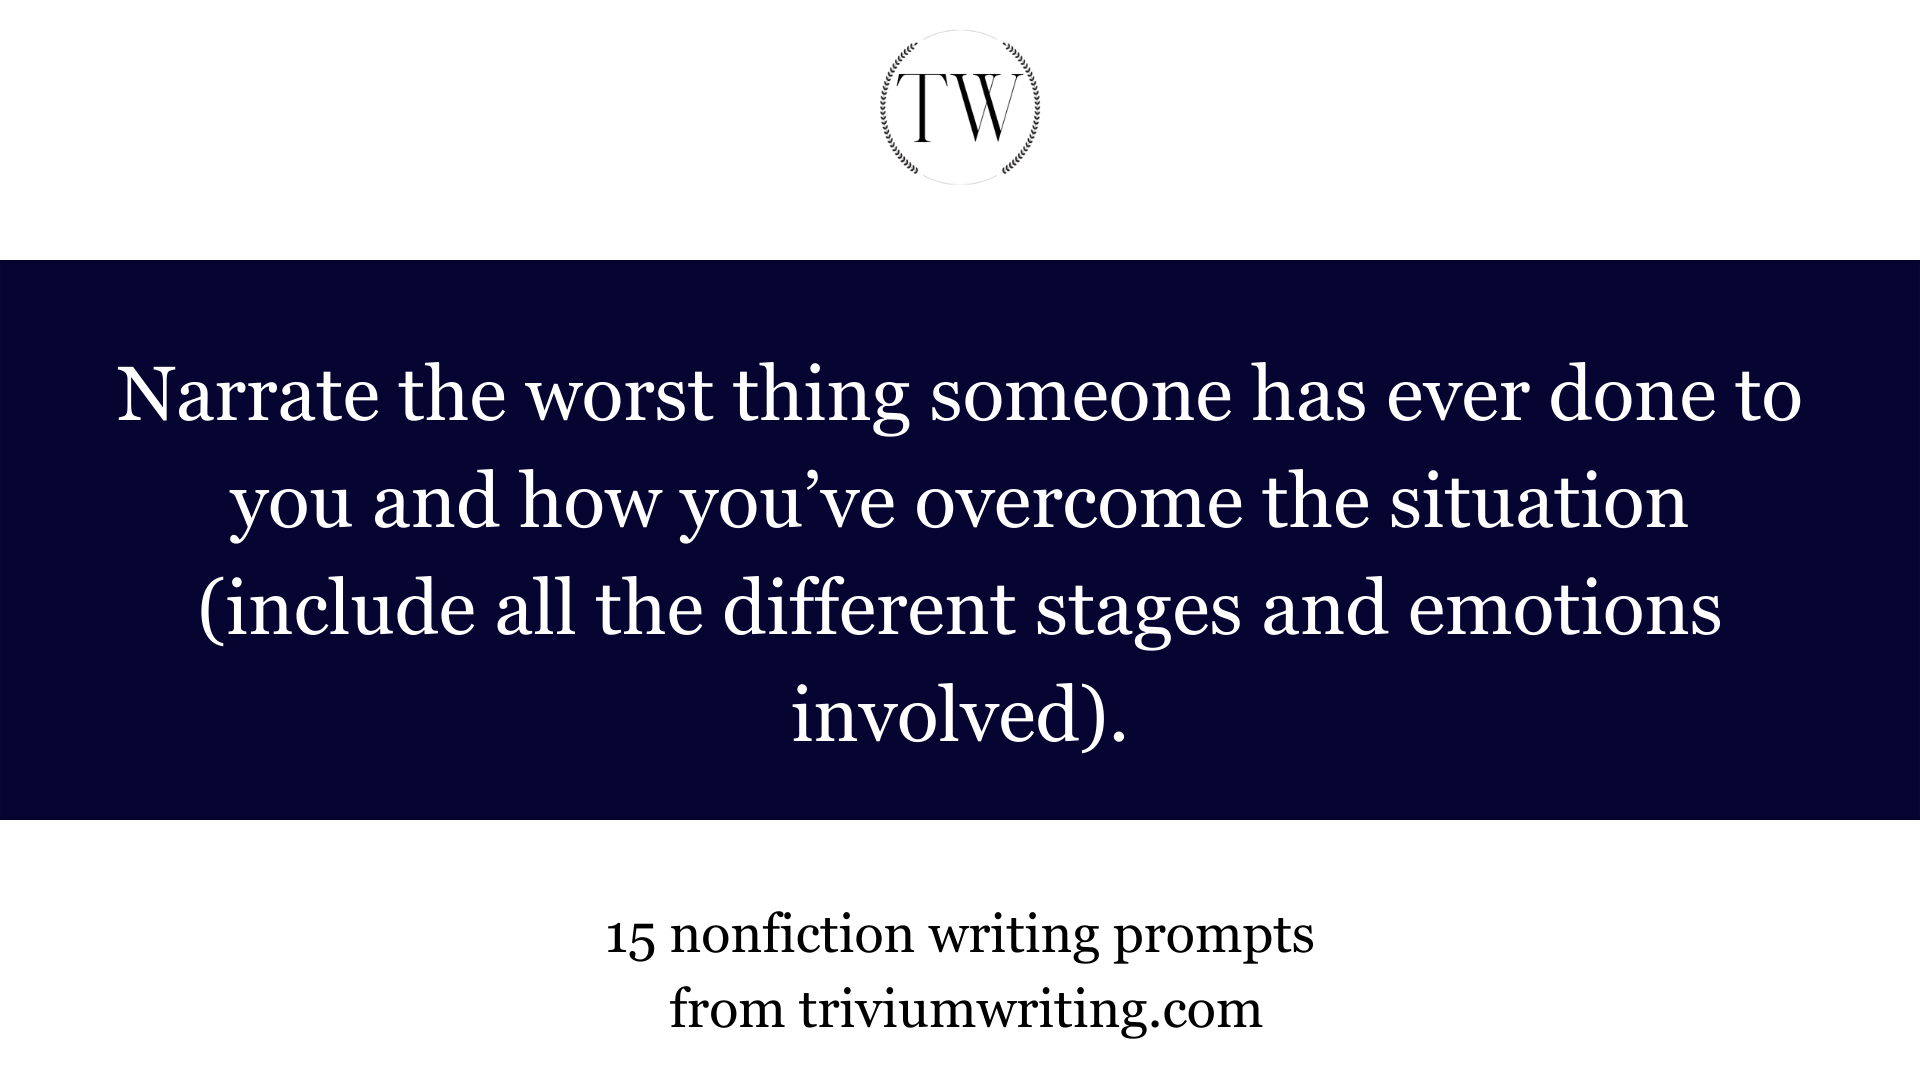 Narrate the worst thing someone has ever done to you and how you’ve overcome the situation